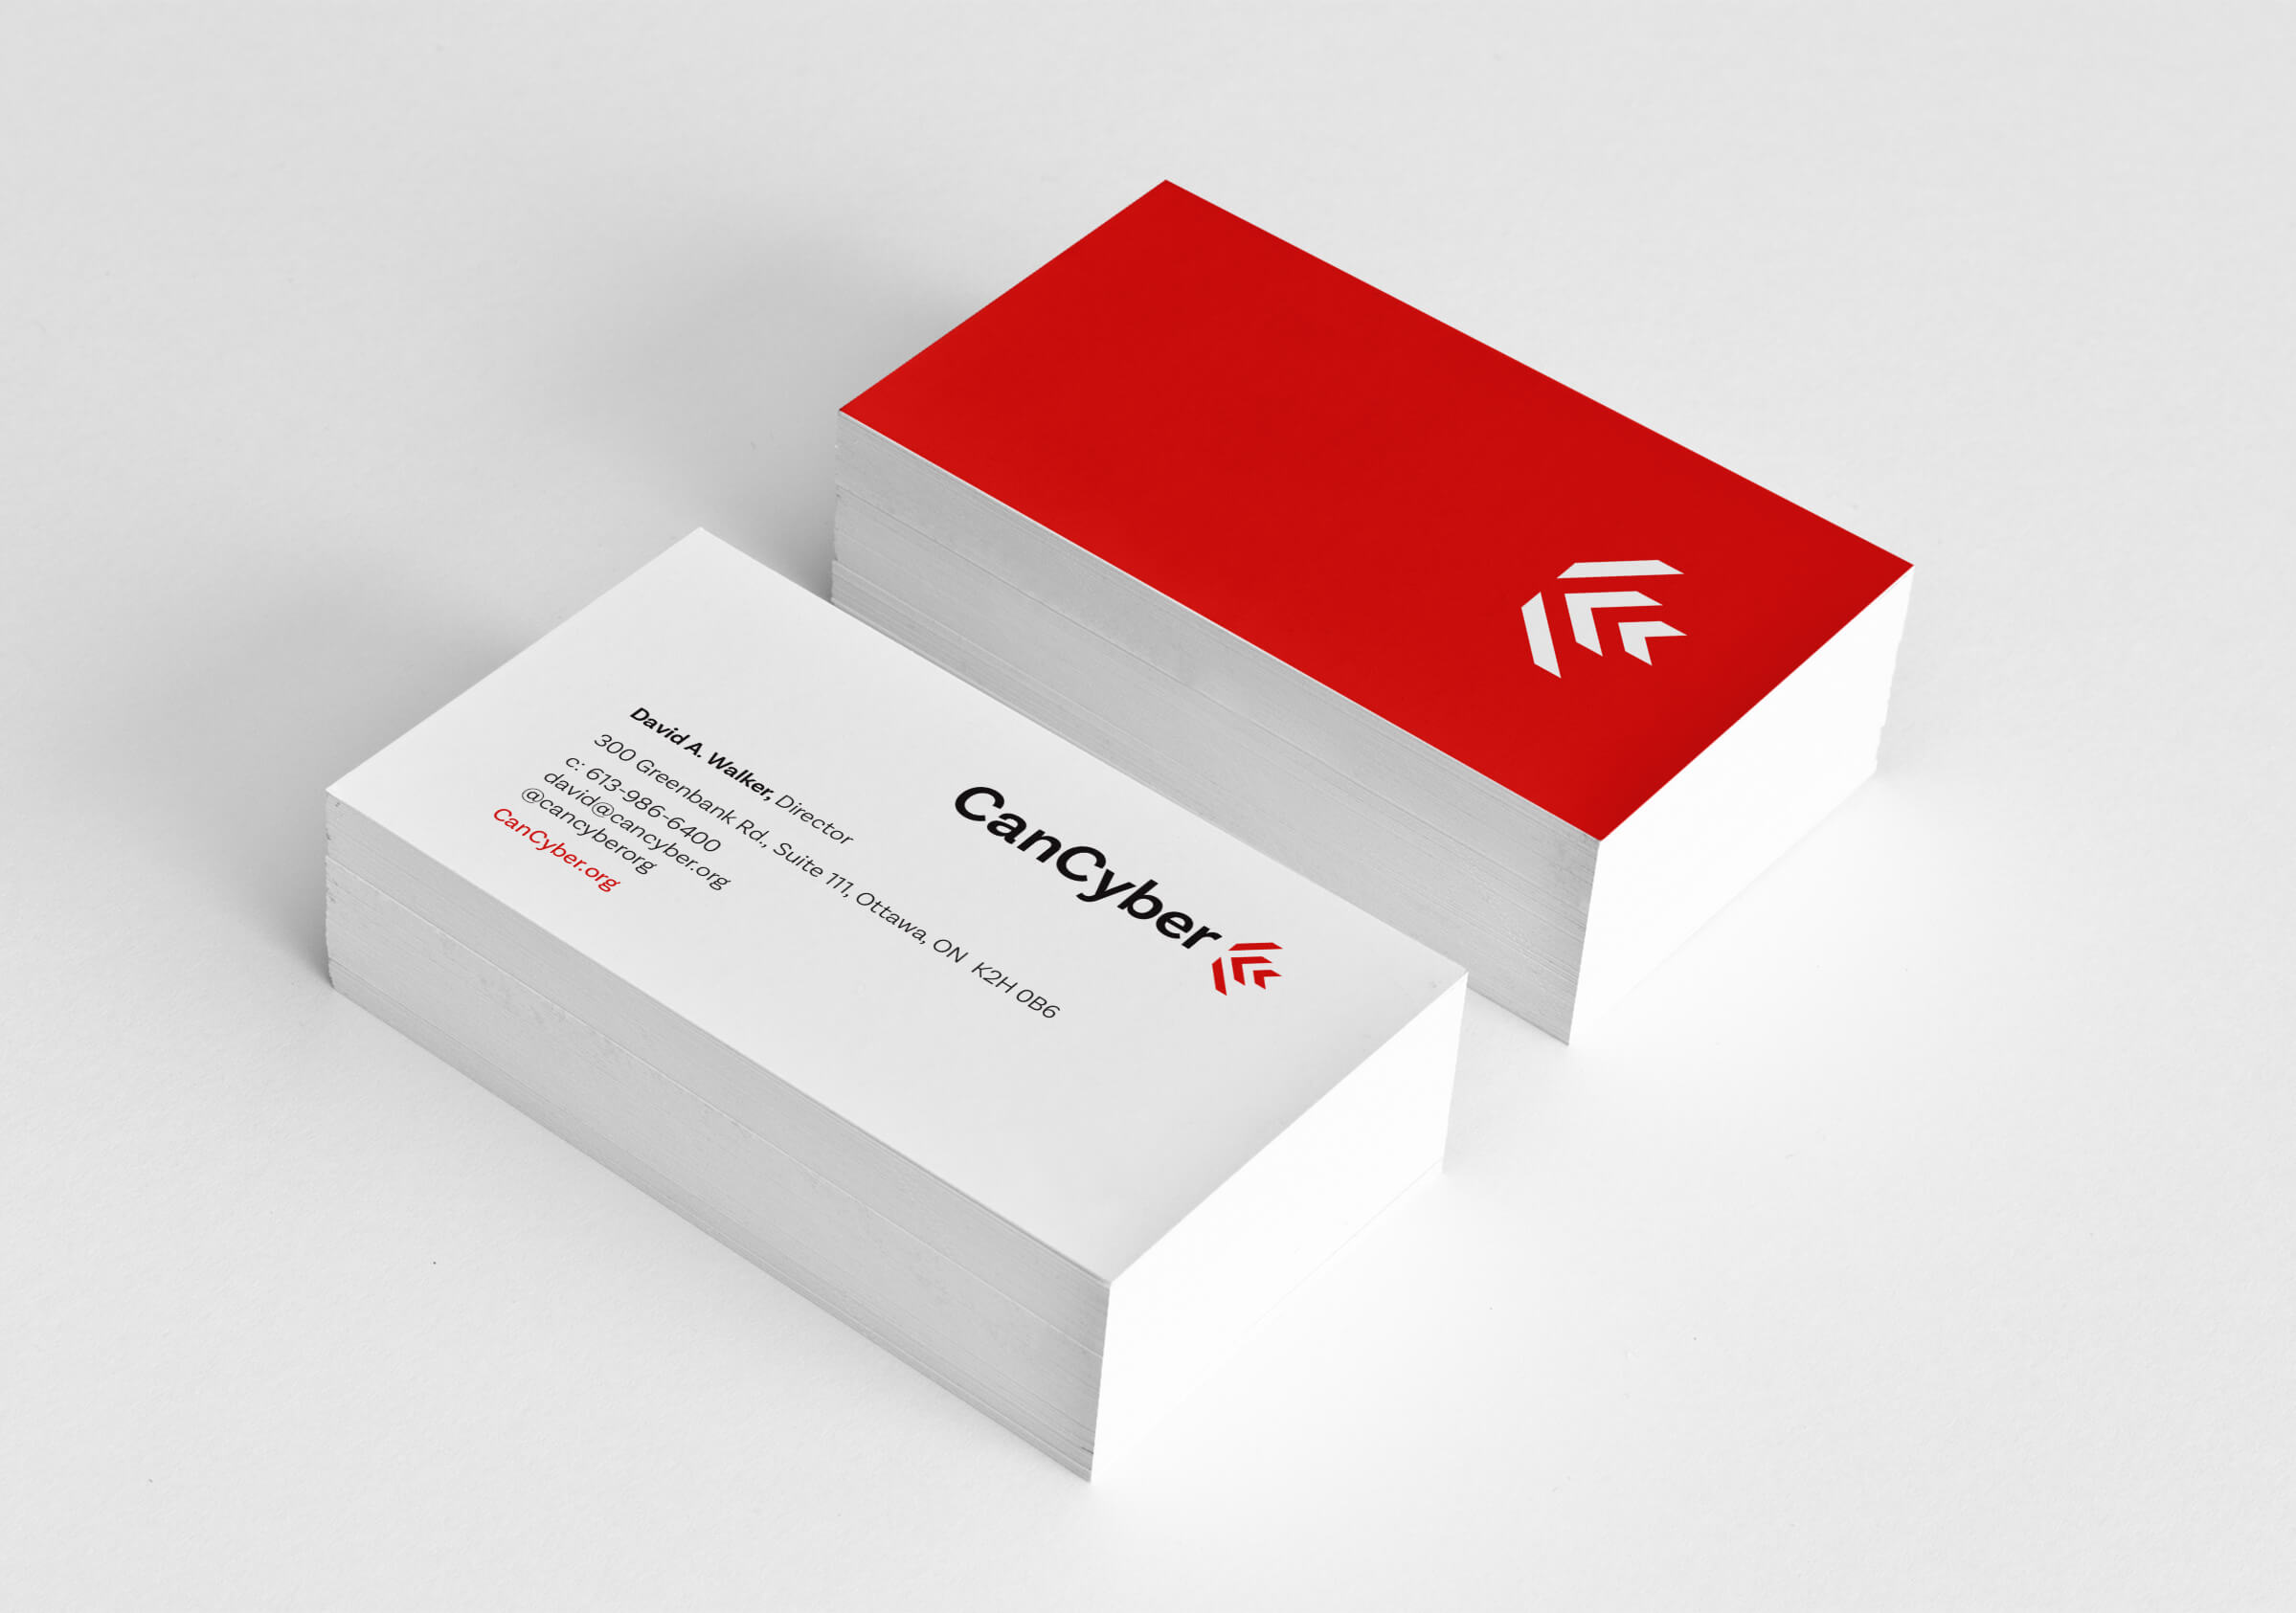 Business Cards for CanCyber, a cyber threat intelligence company by Graphic Design Studio idApostle